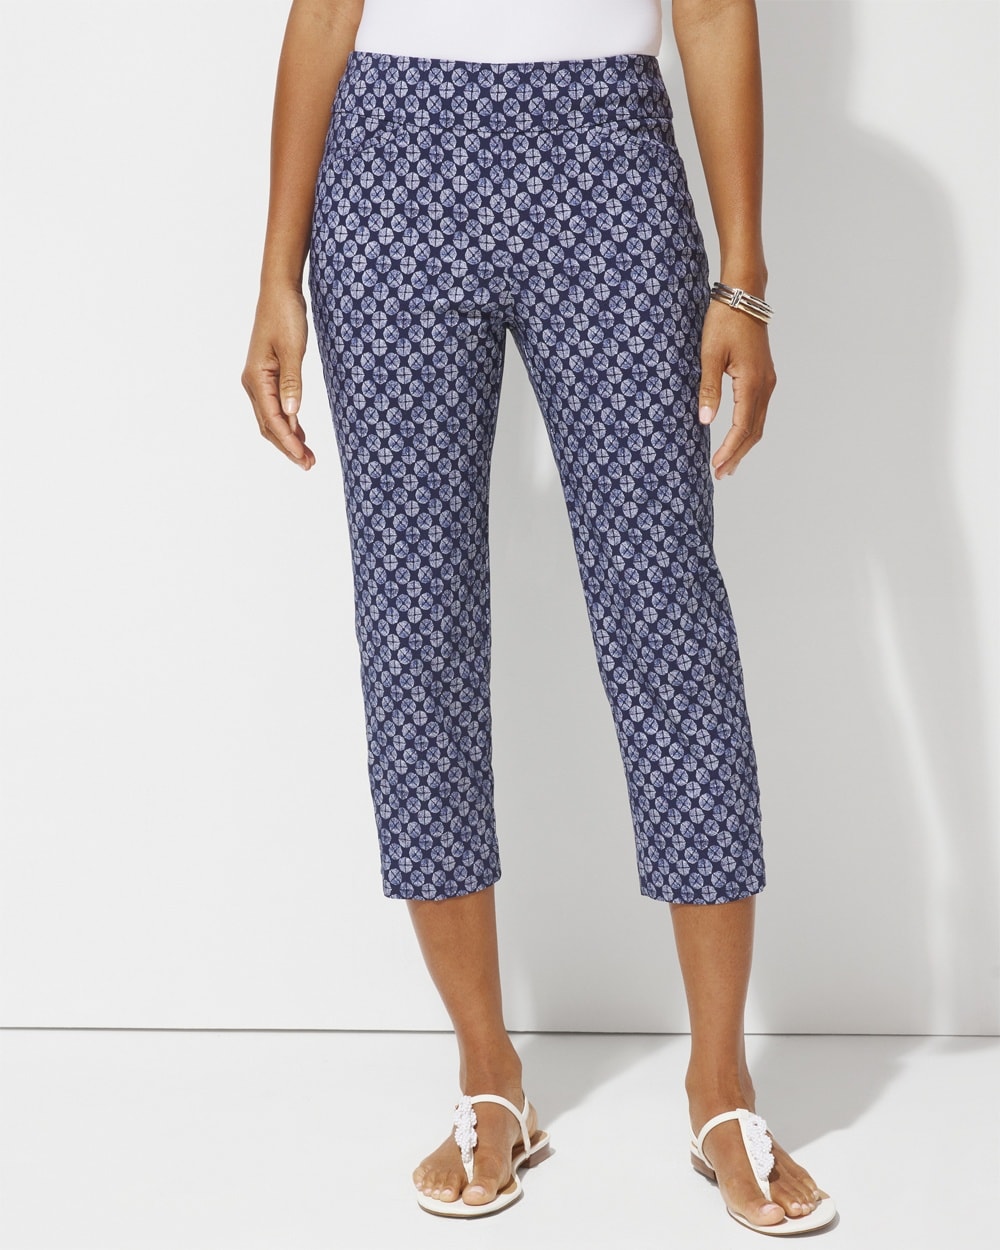 Dot Octagon Perfect Stretch Josie Slim Capri Pants with Lace-Up Detail